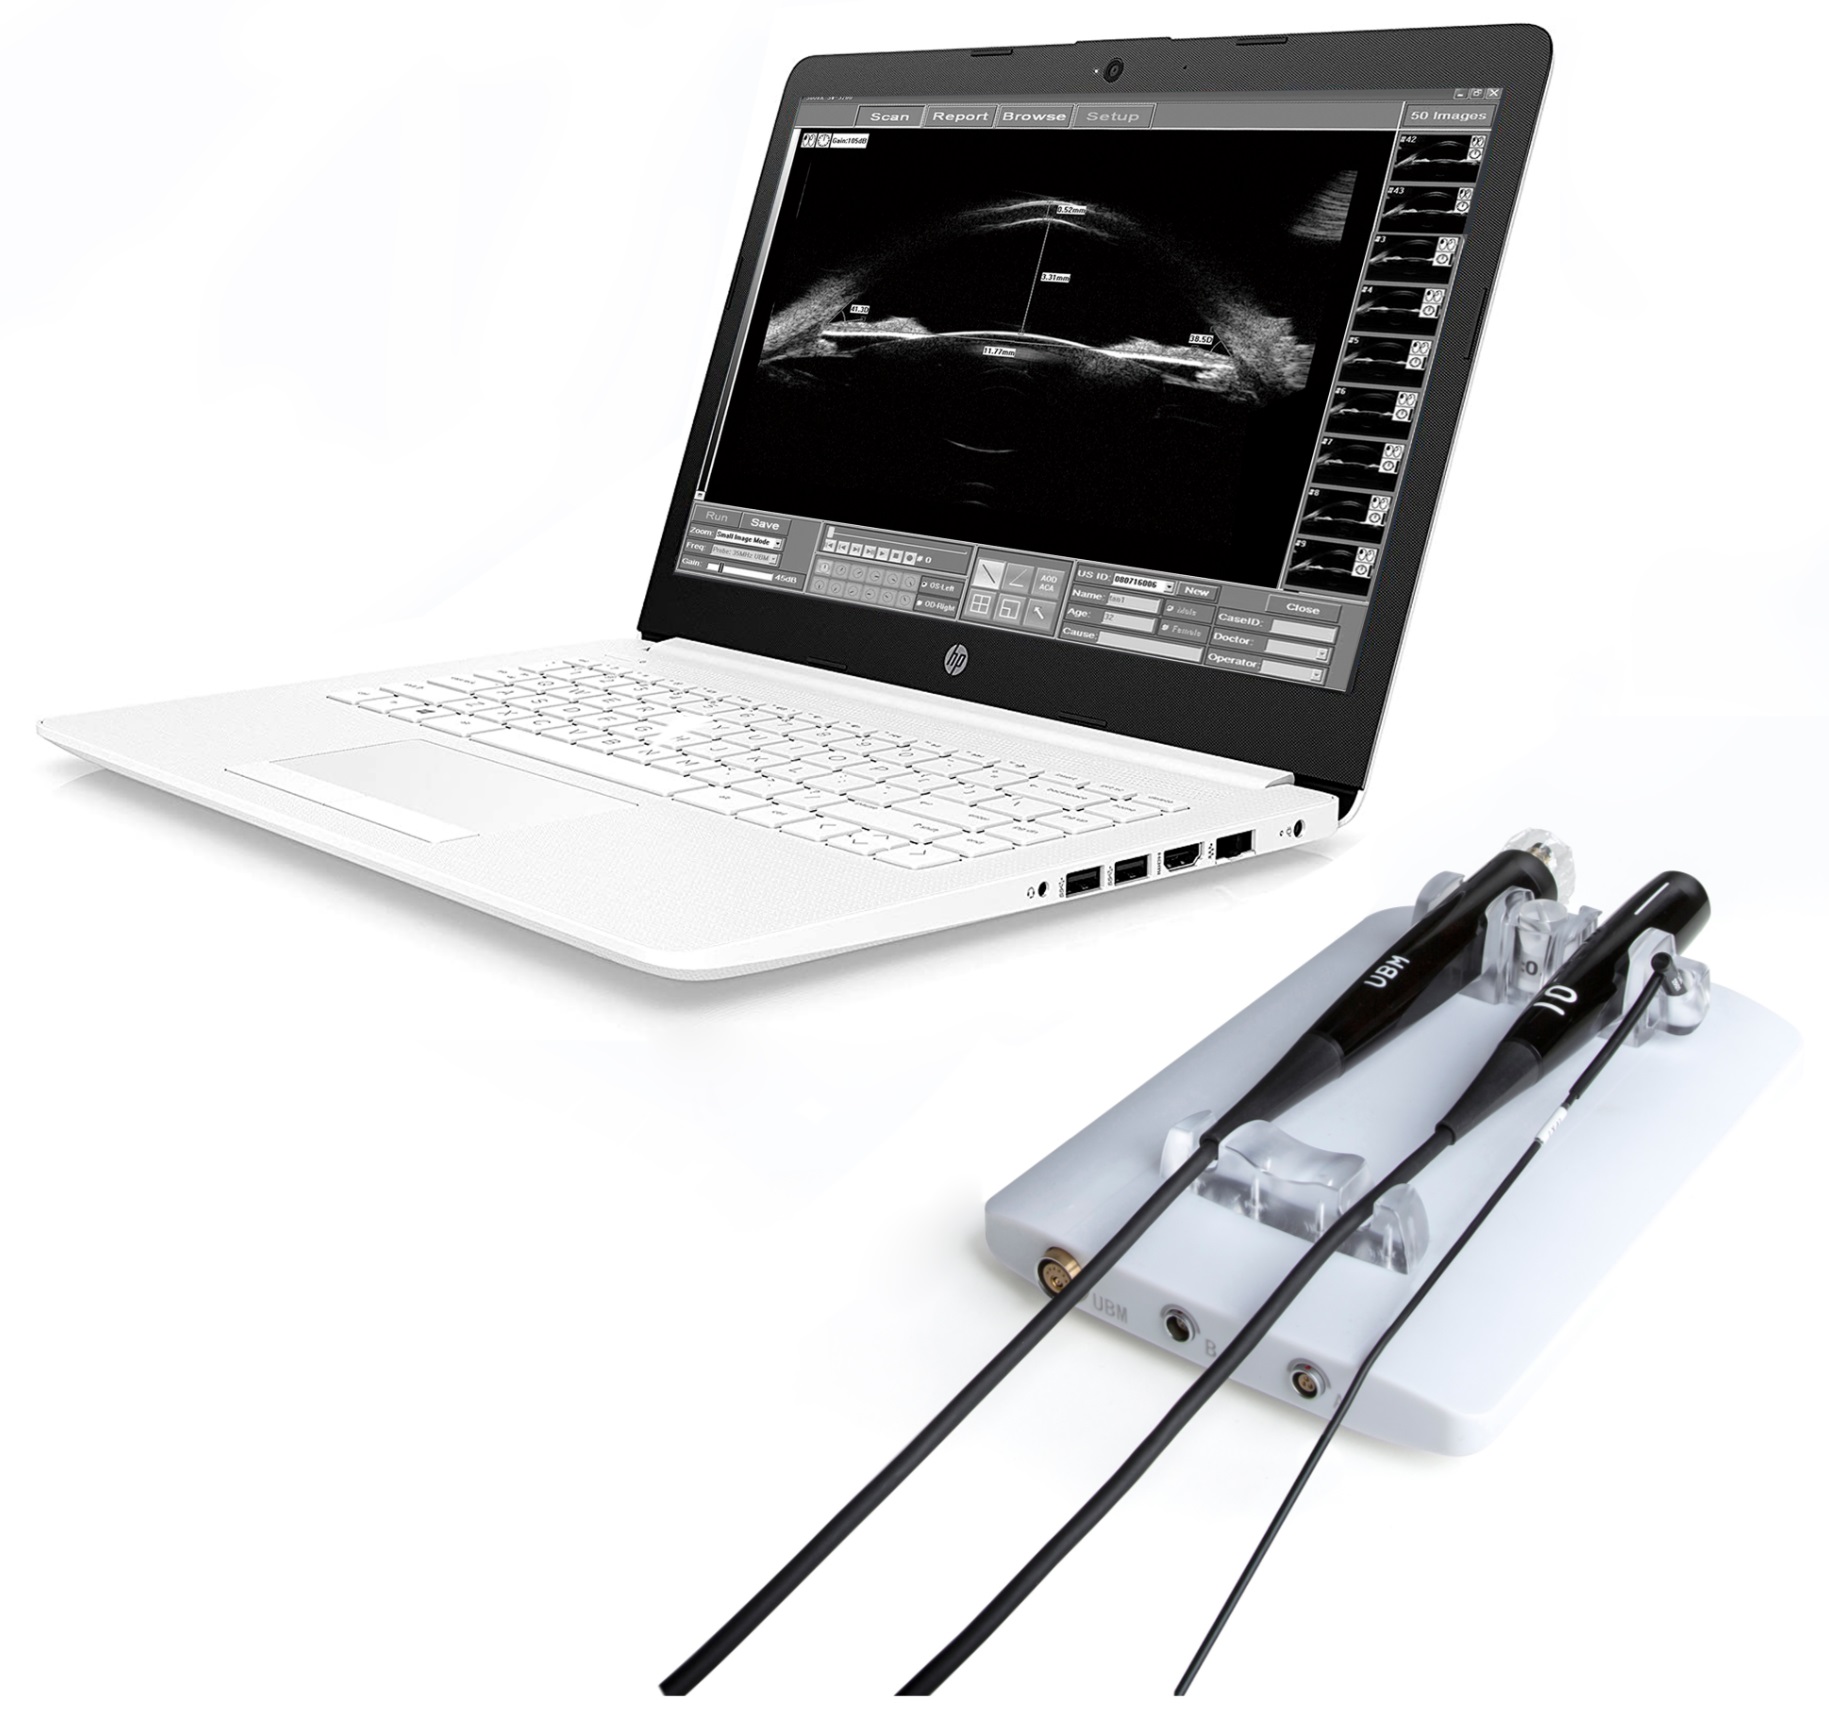 Suoer-sw-21-delta-scan-modular-and-upgreatable-ultrasound-instrument-device